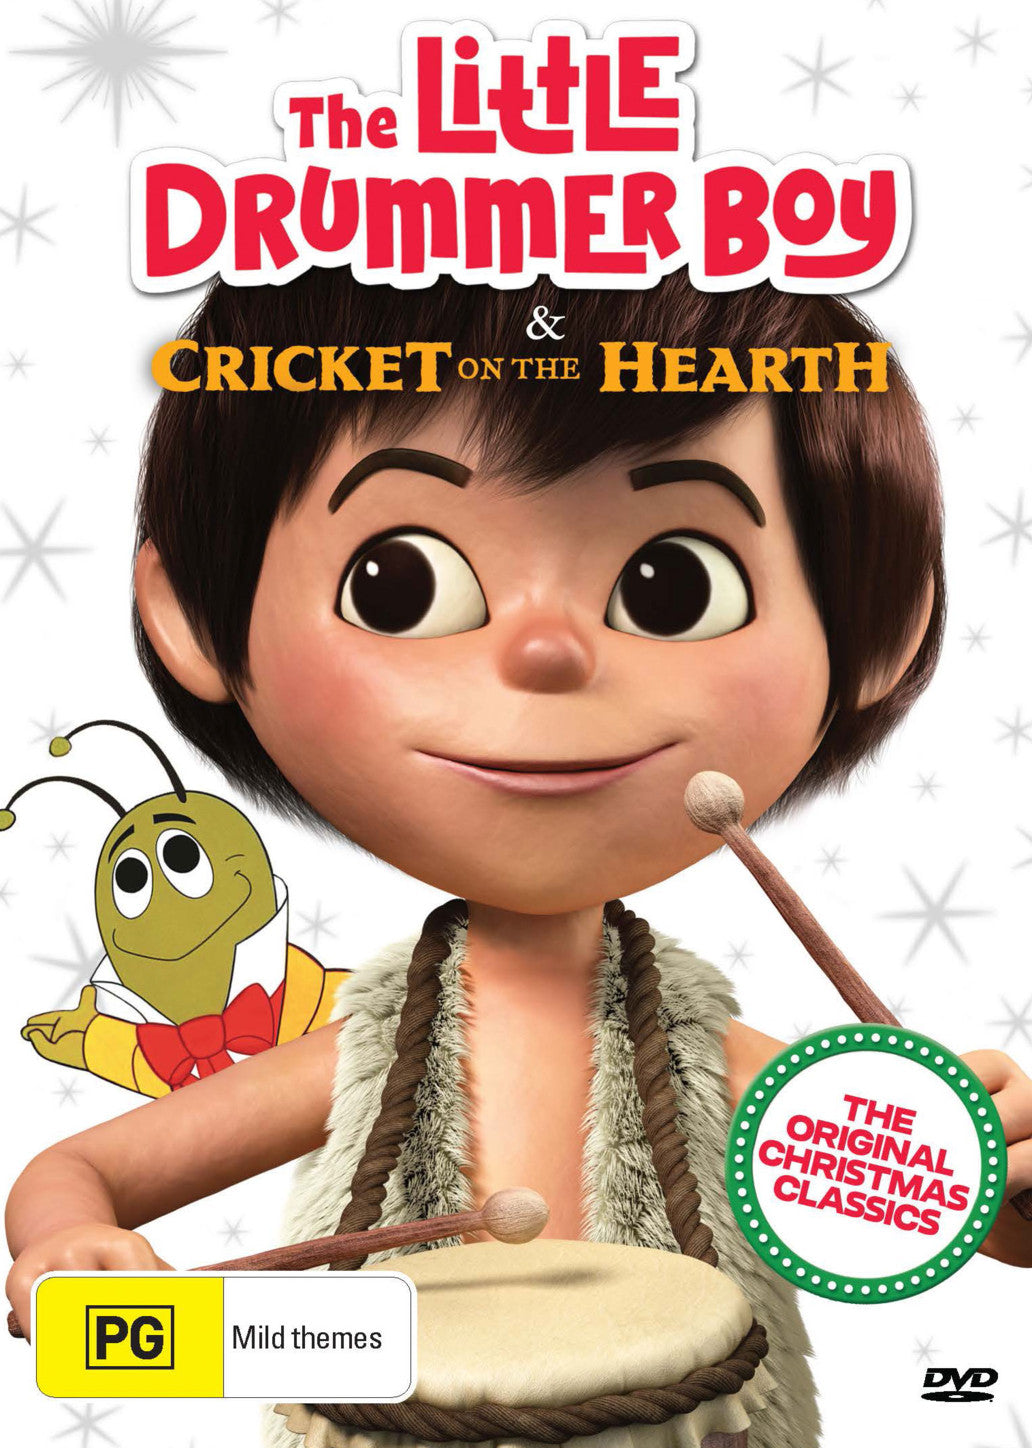 THE LITTLE DRUMMER BOY / CRICKET ON THE HEARTH